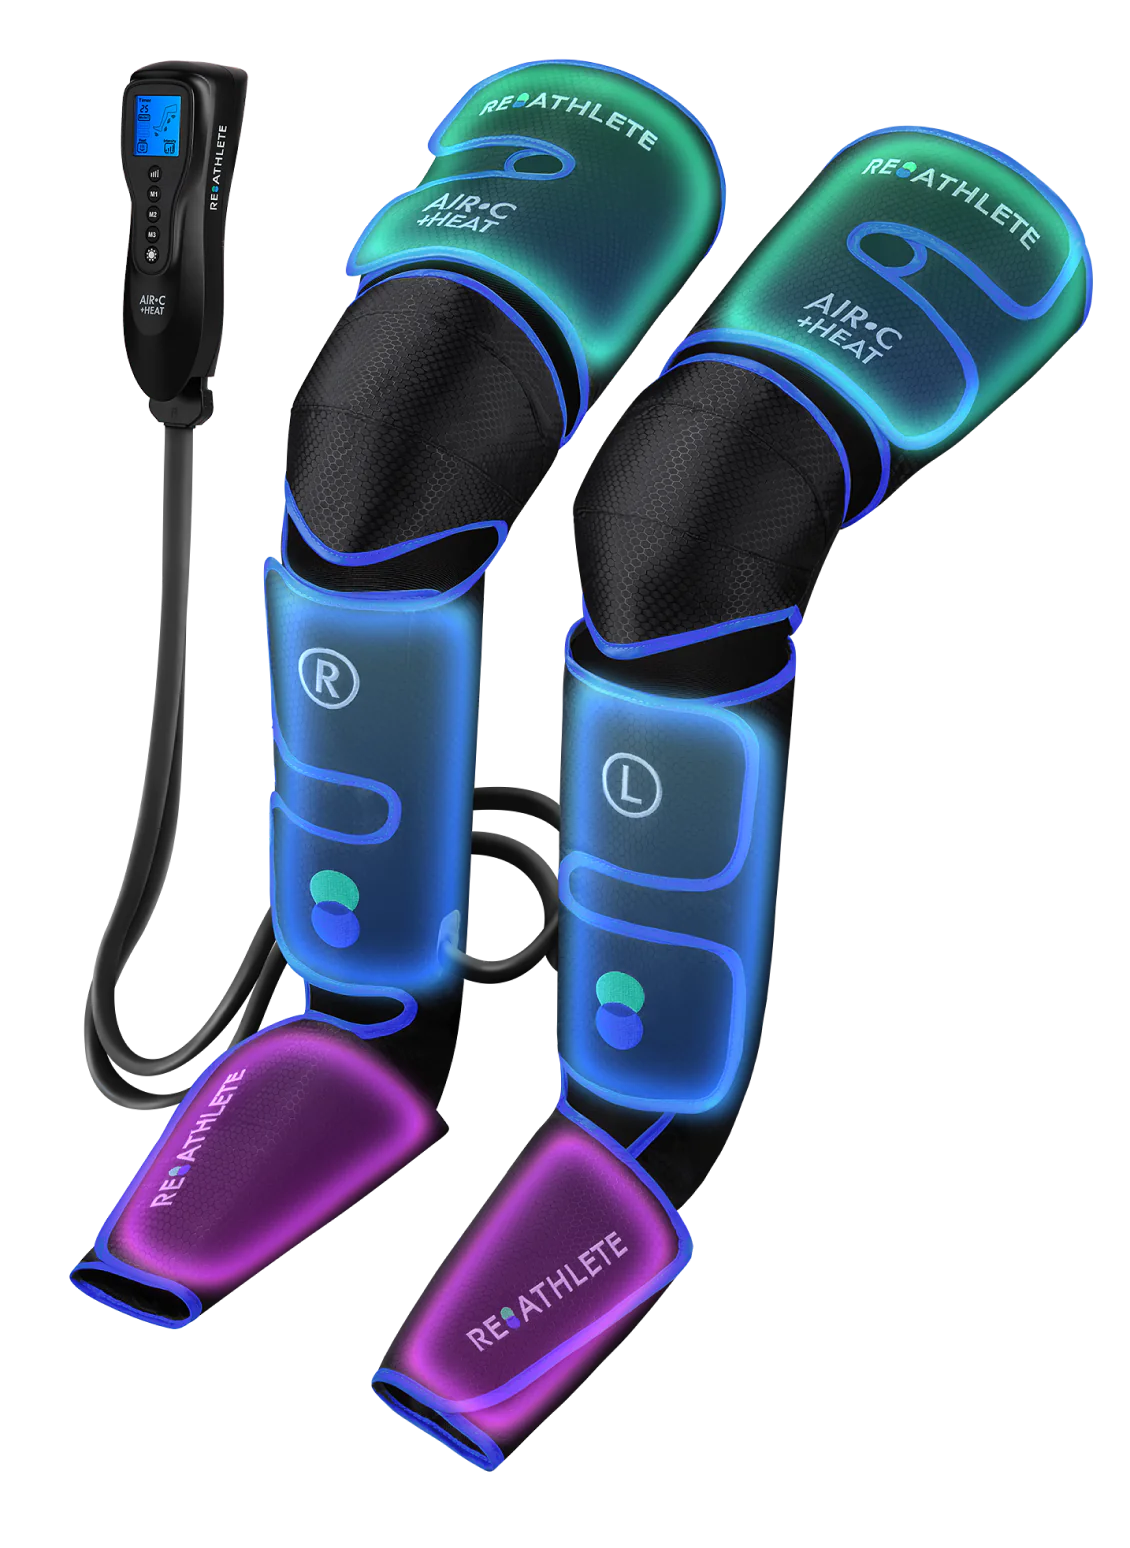 Reathlete HEALR Triple Therapy Leg Massager with Compression, Heat